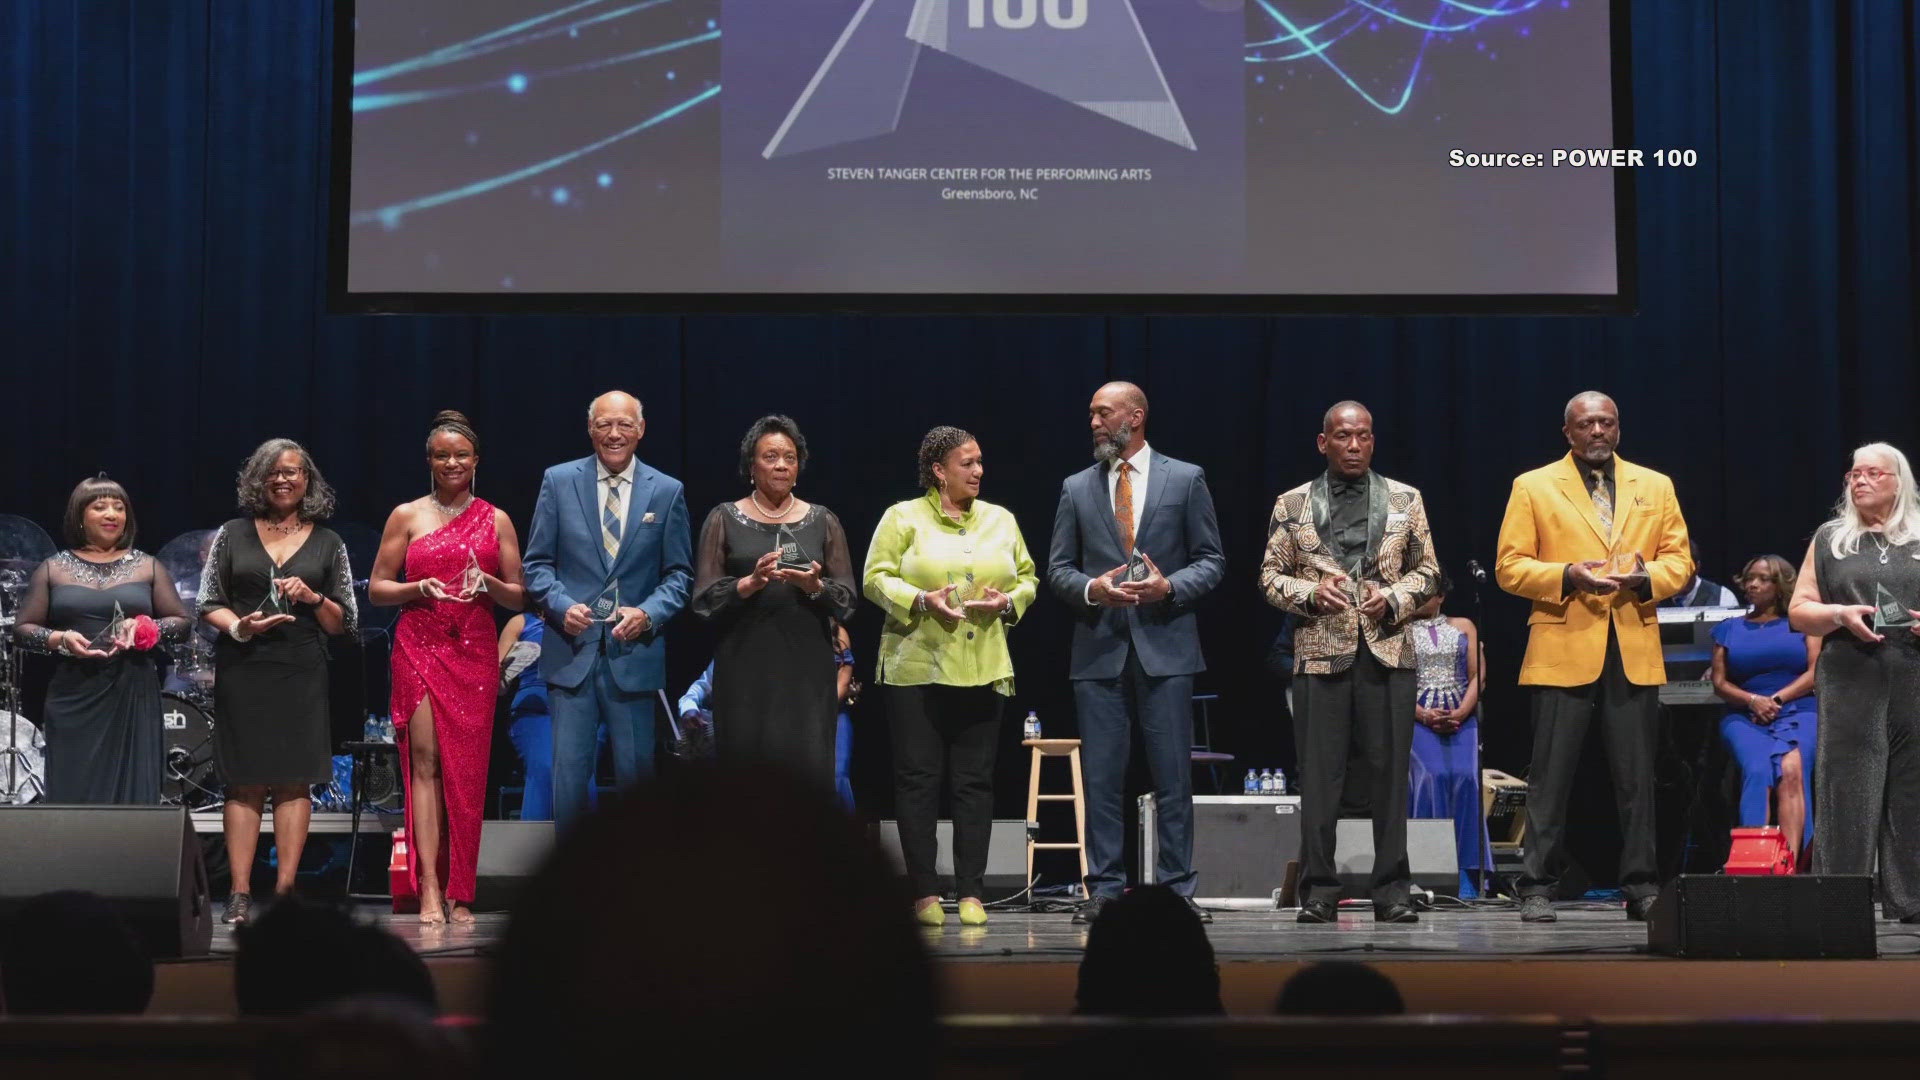 Black Business Ink is honoring 100 of North Carolina's top black business leaders and organizations for the second straight year.